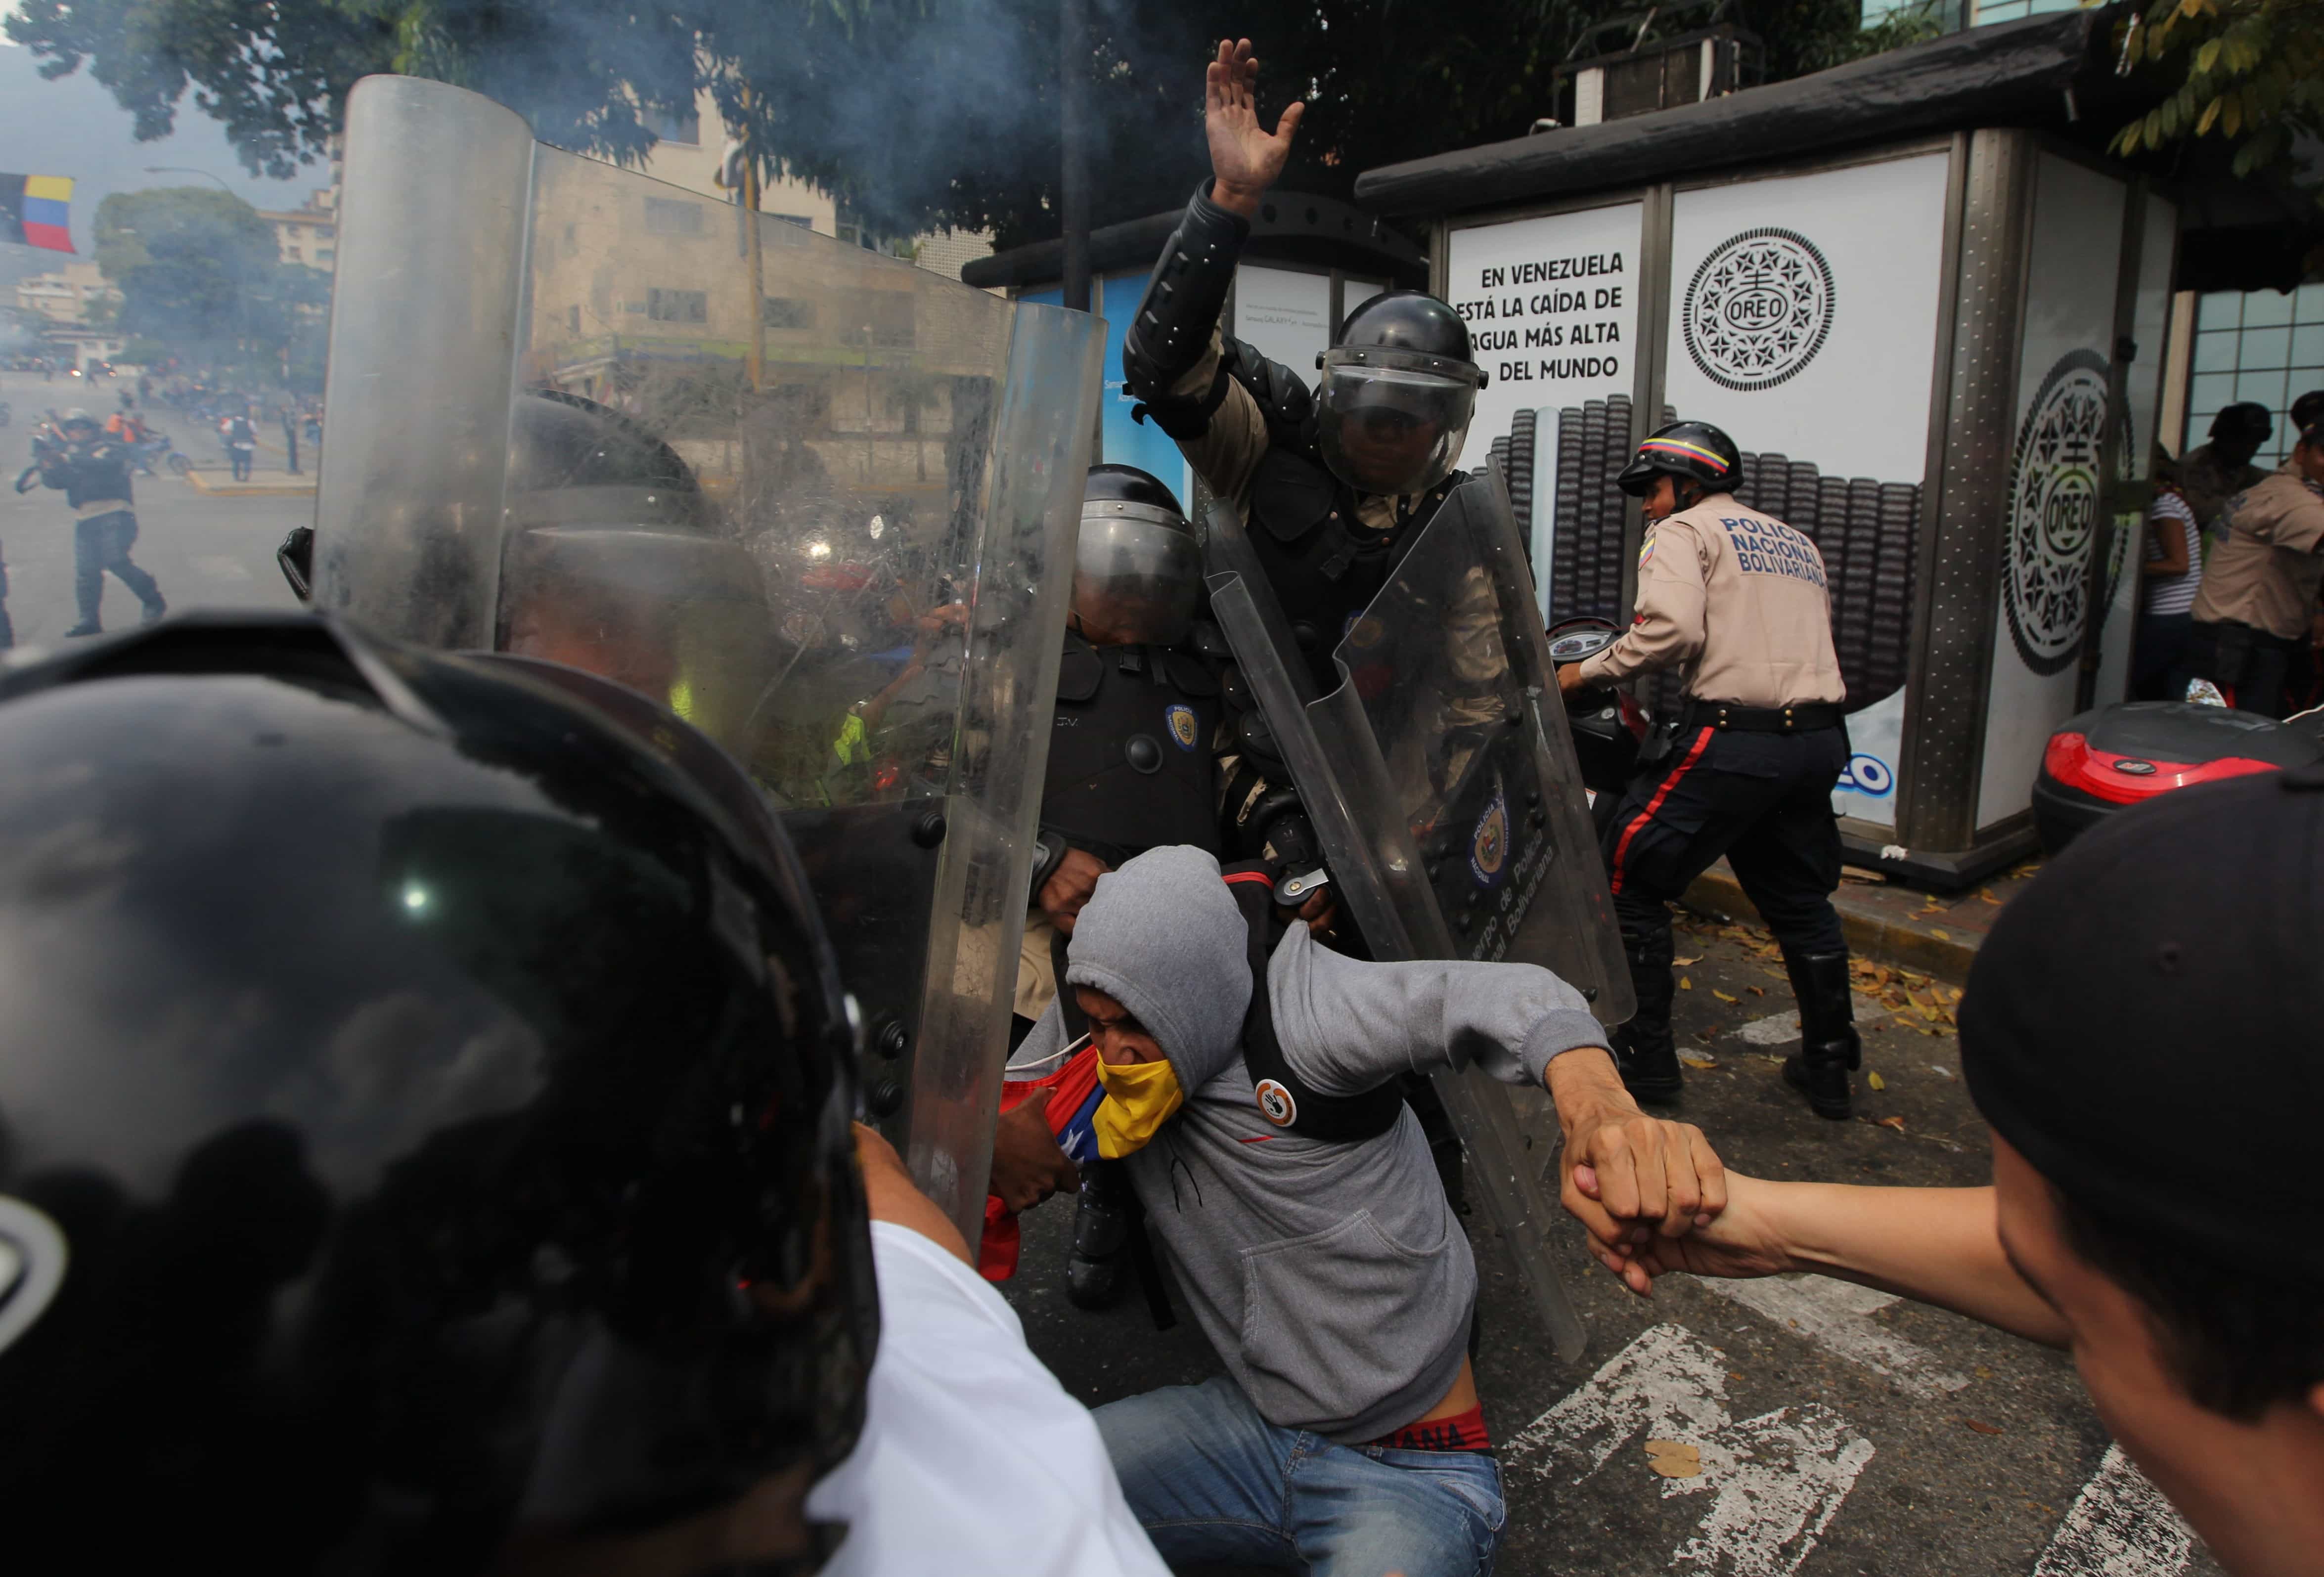 Bolivarian National Police detain a demonstrator during clashes at an anti-government protest in Caracas, Venezuela, 1 April 2014., AP Photo/Fernando Llano